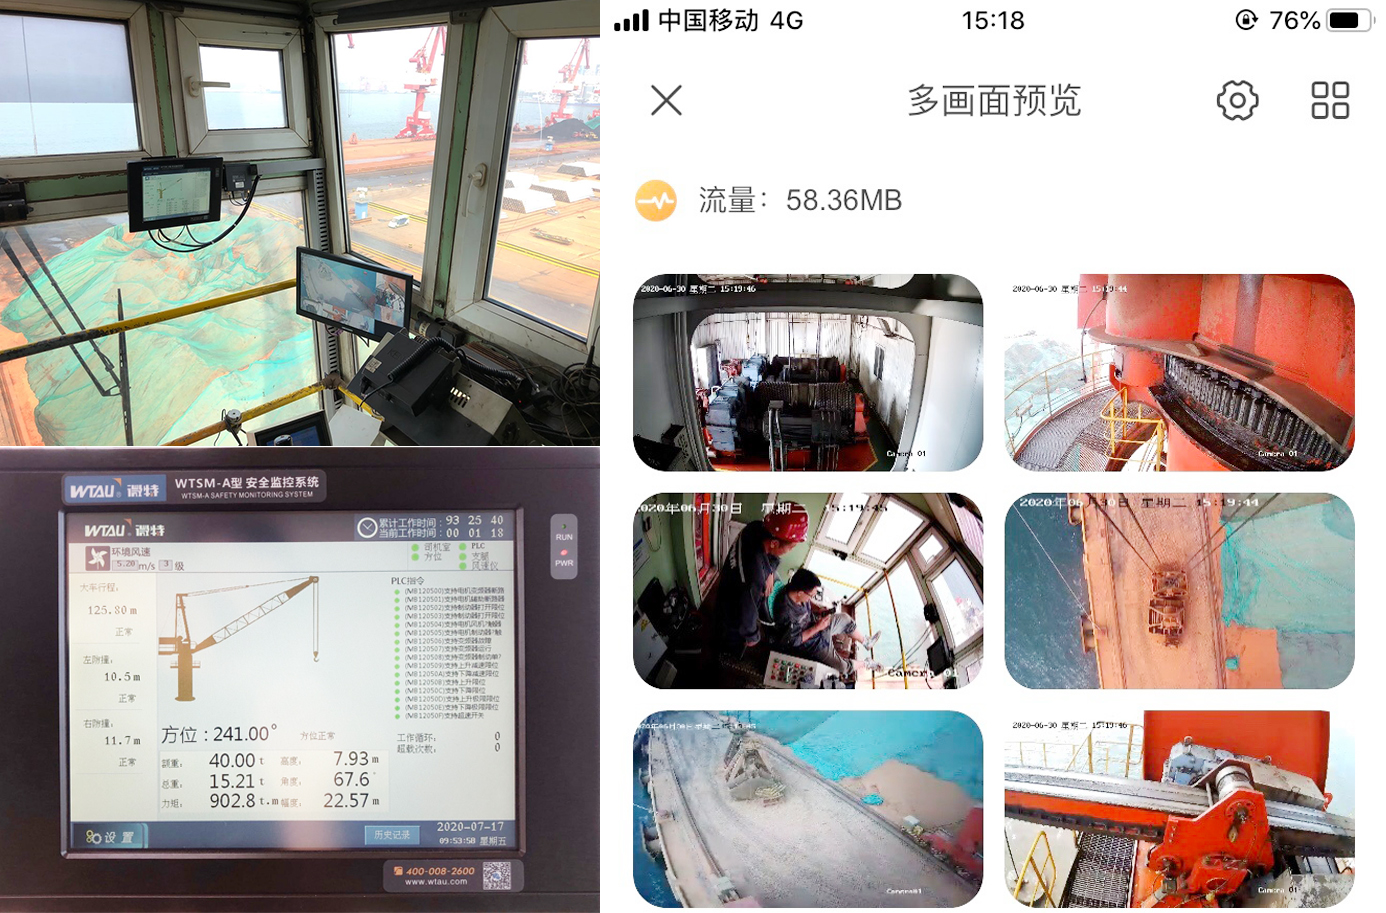 Wtsm-a-08 safety monitoring system for portal crane